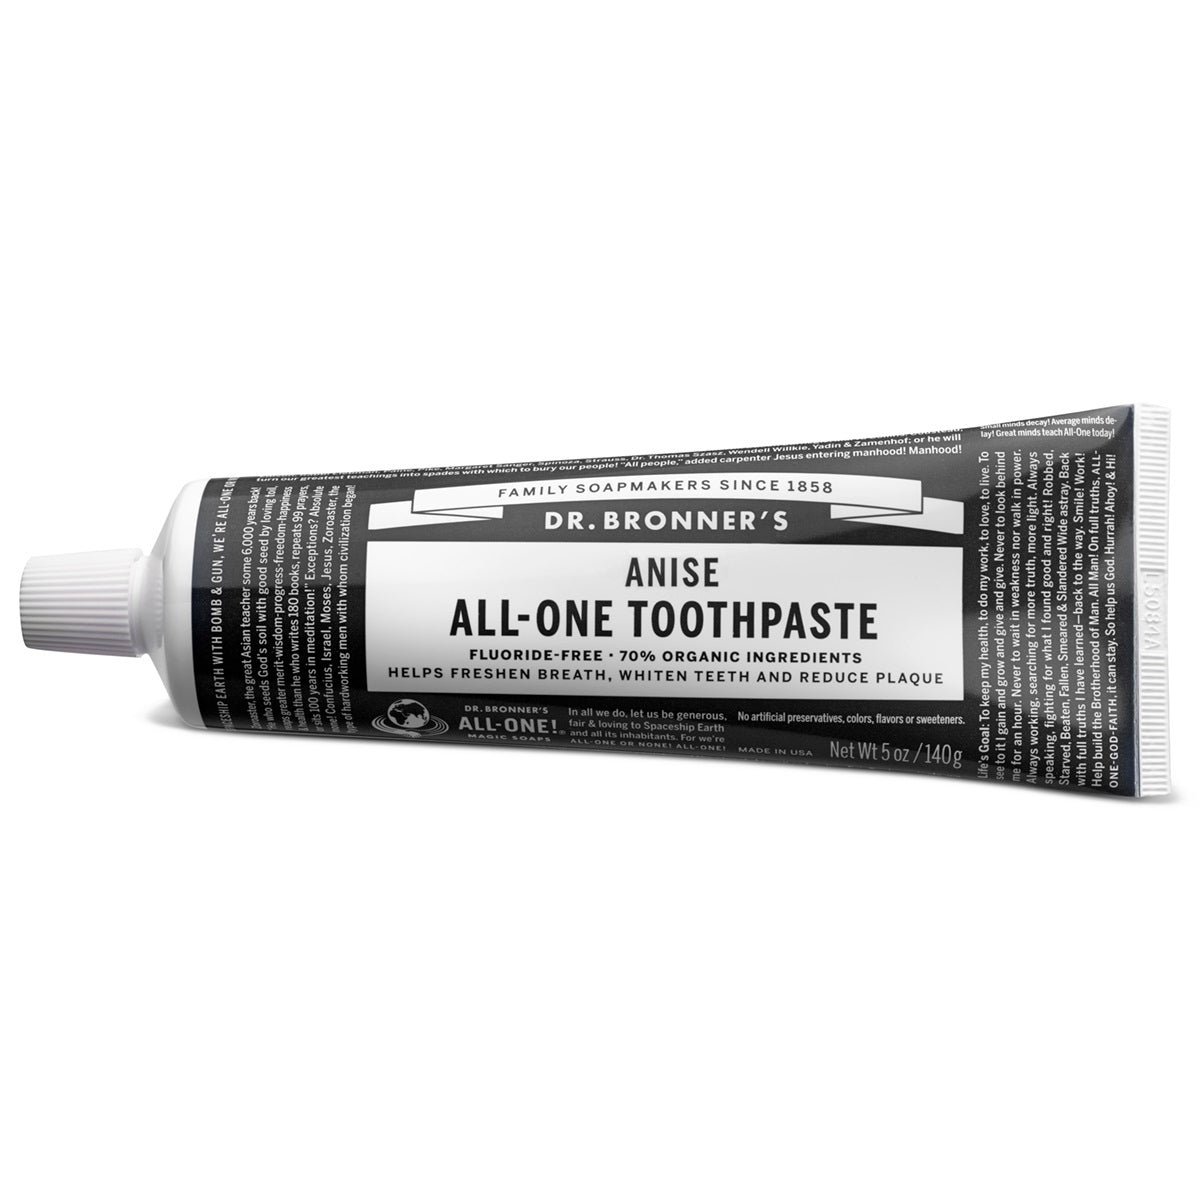 Primary image of Anise Toothpaste